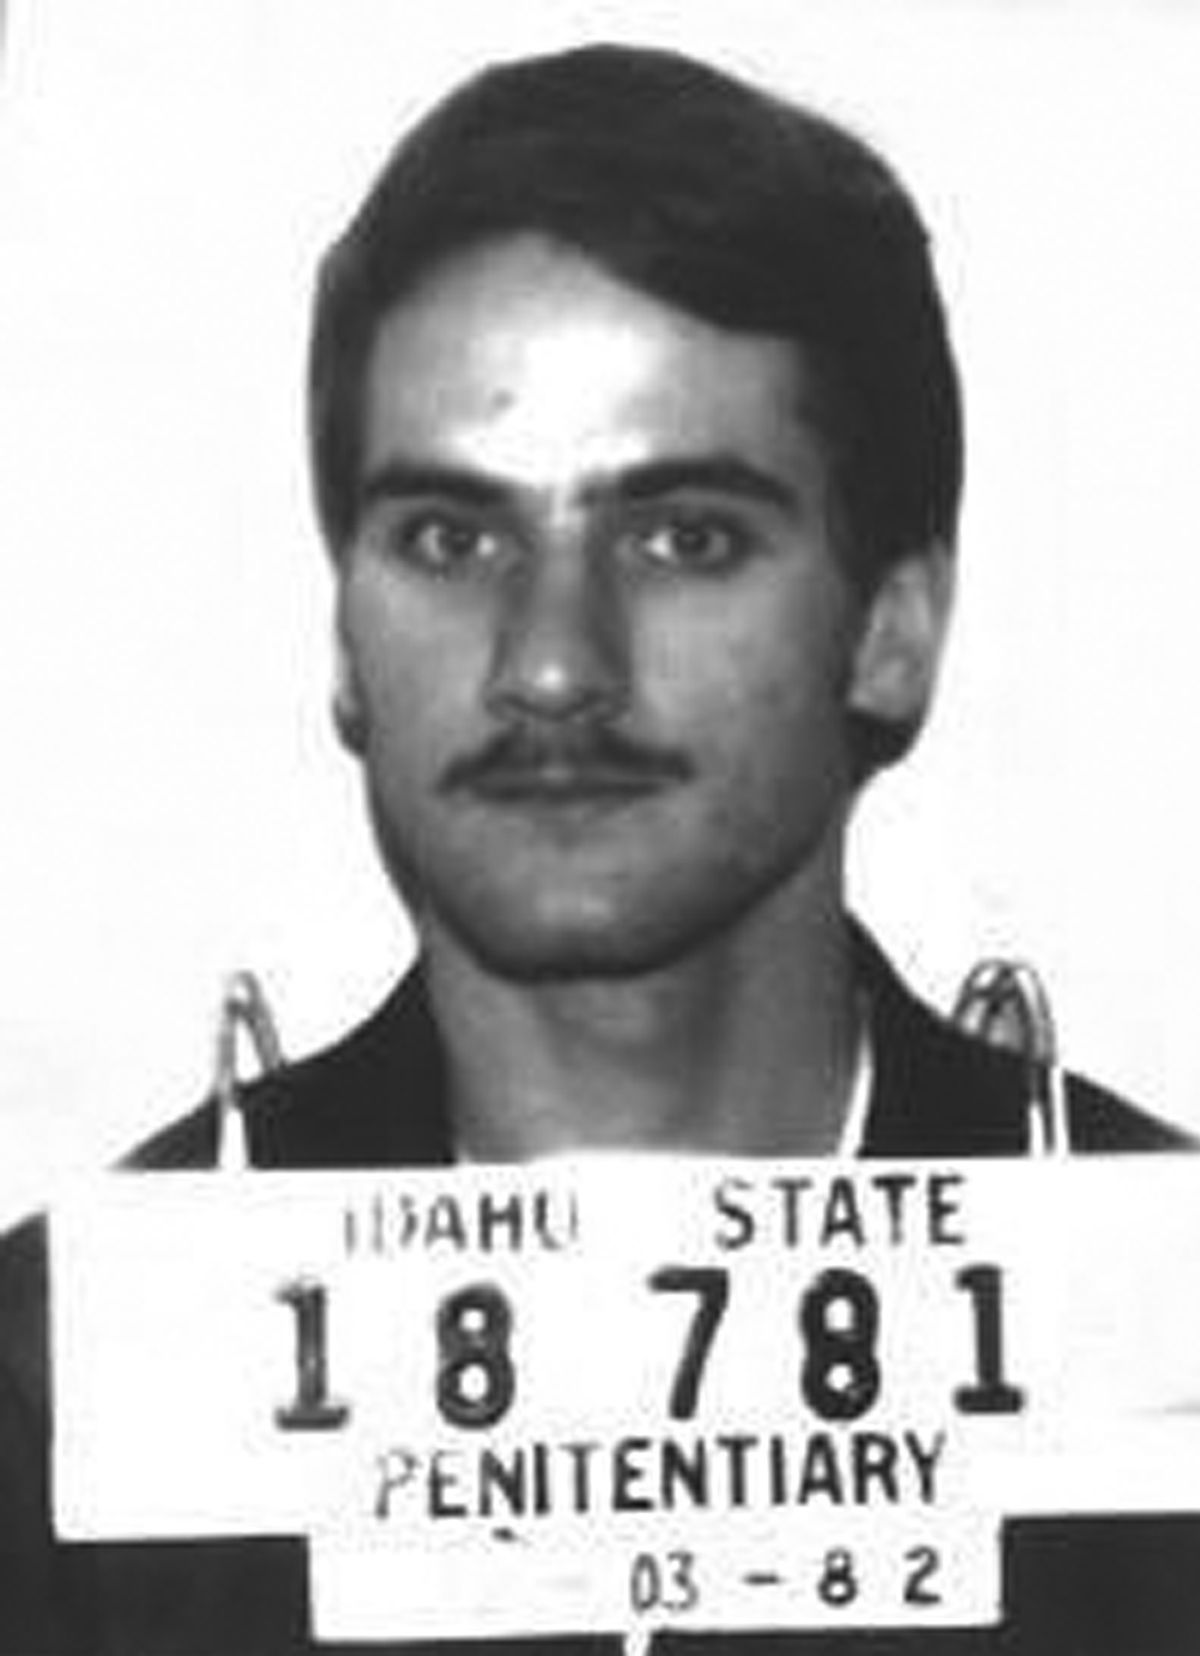 1982 Mark Brown arrives at the Idaho State Penitentiary at age 23.